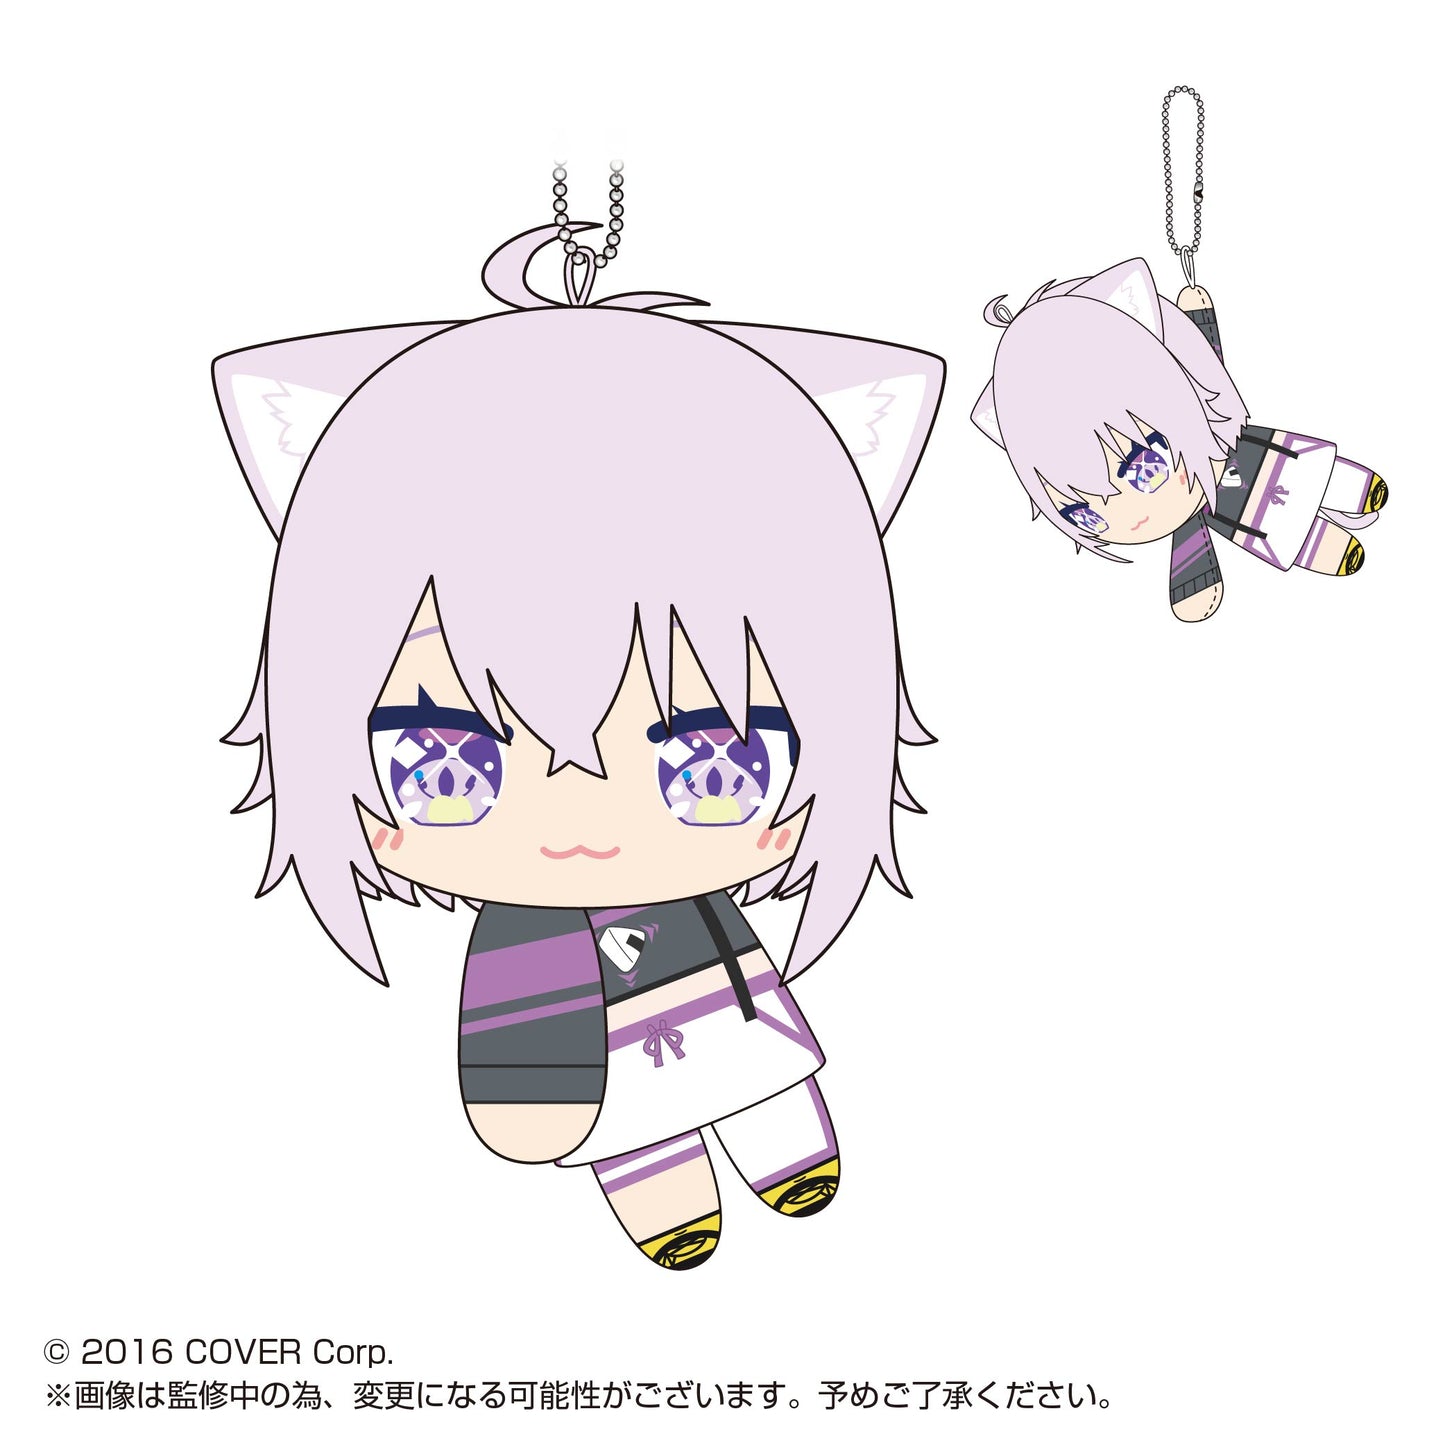 (Pre-Order) Hololive Production - TeteColle 3 - Small Plushy